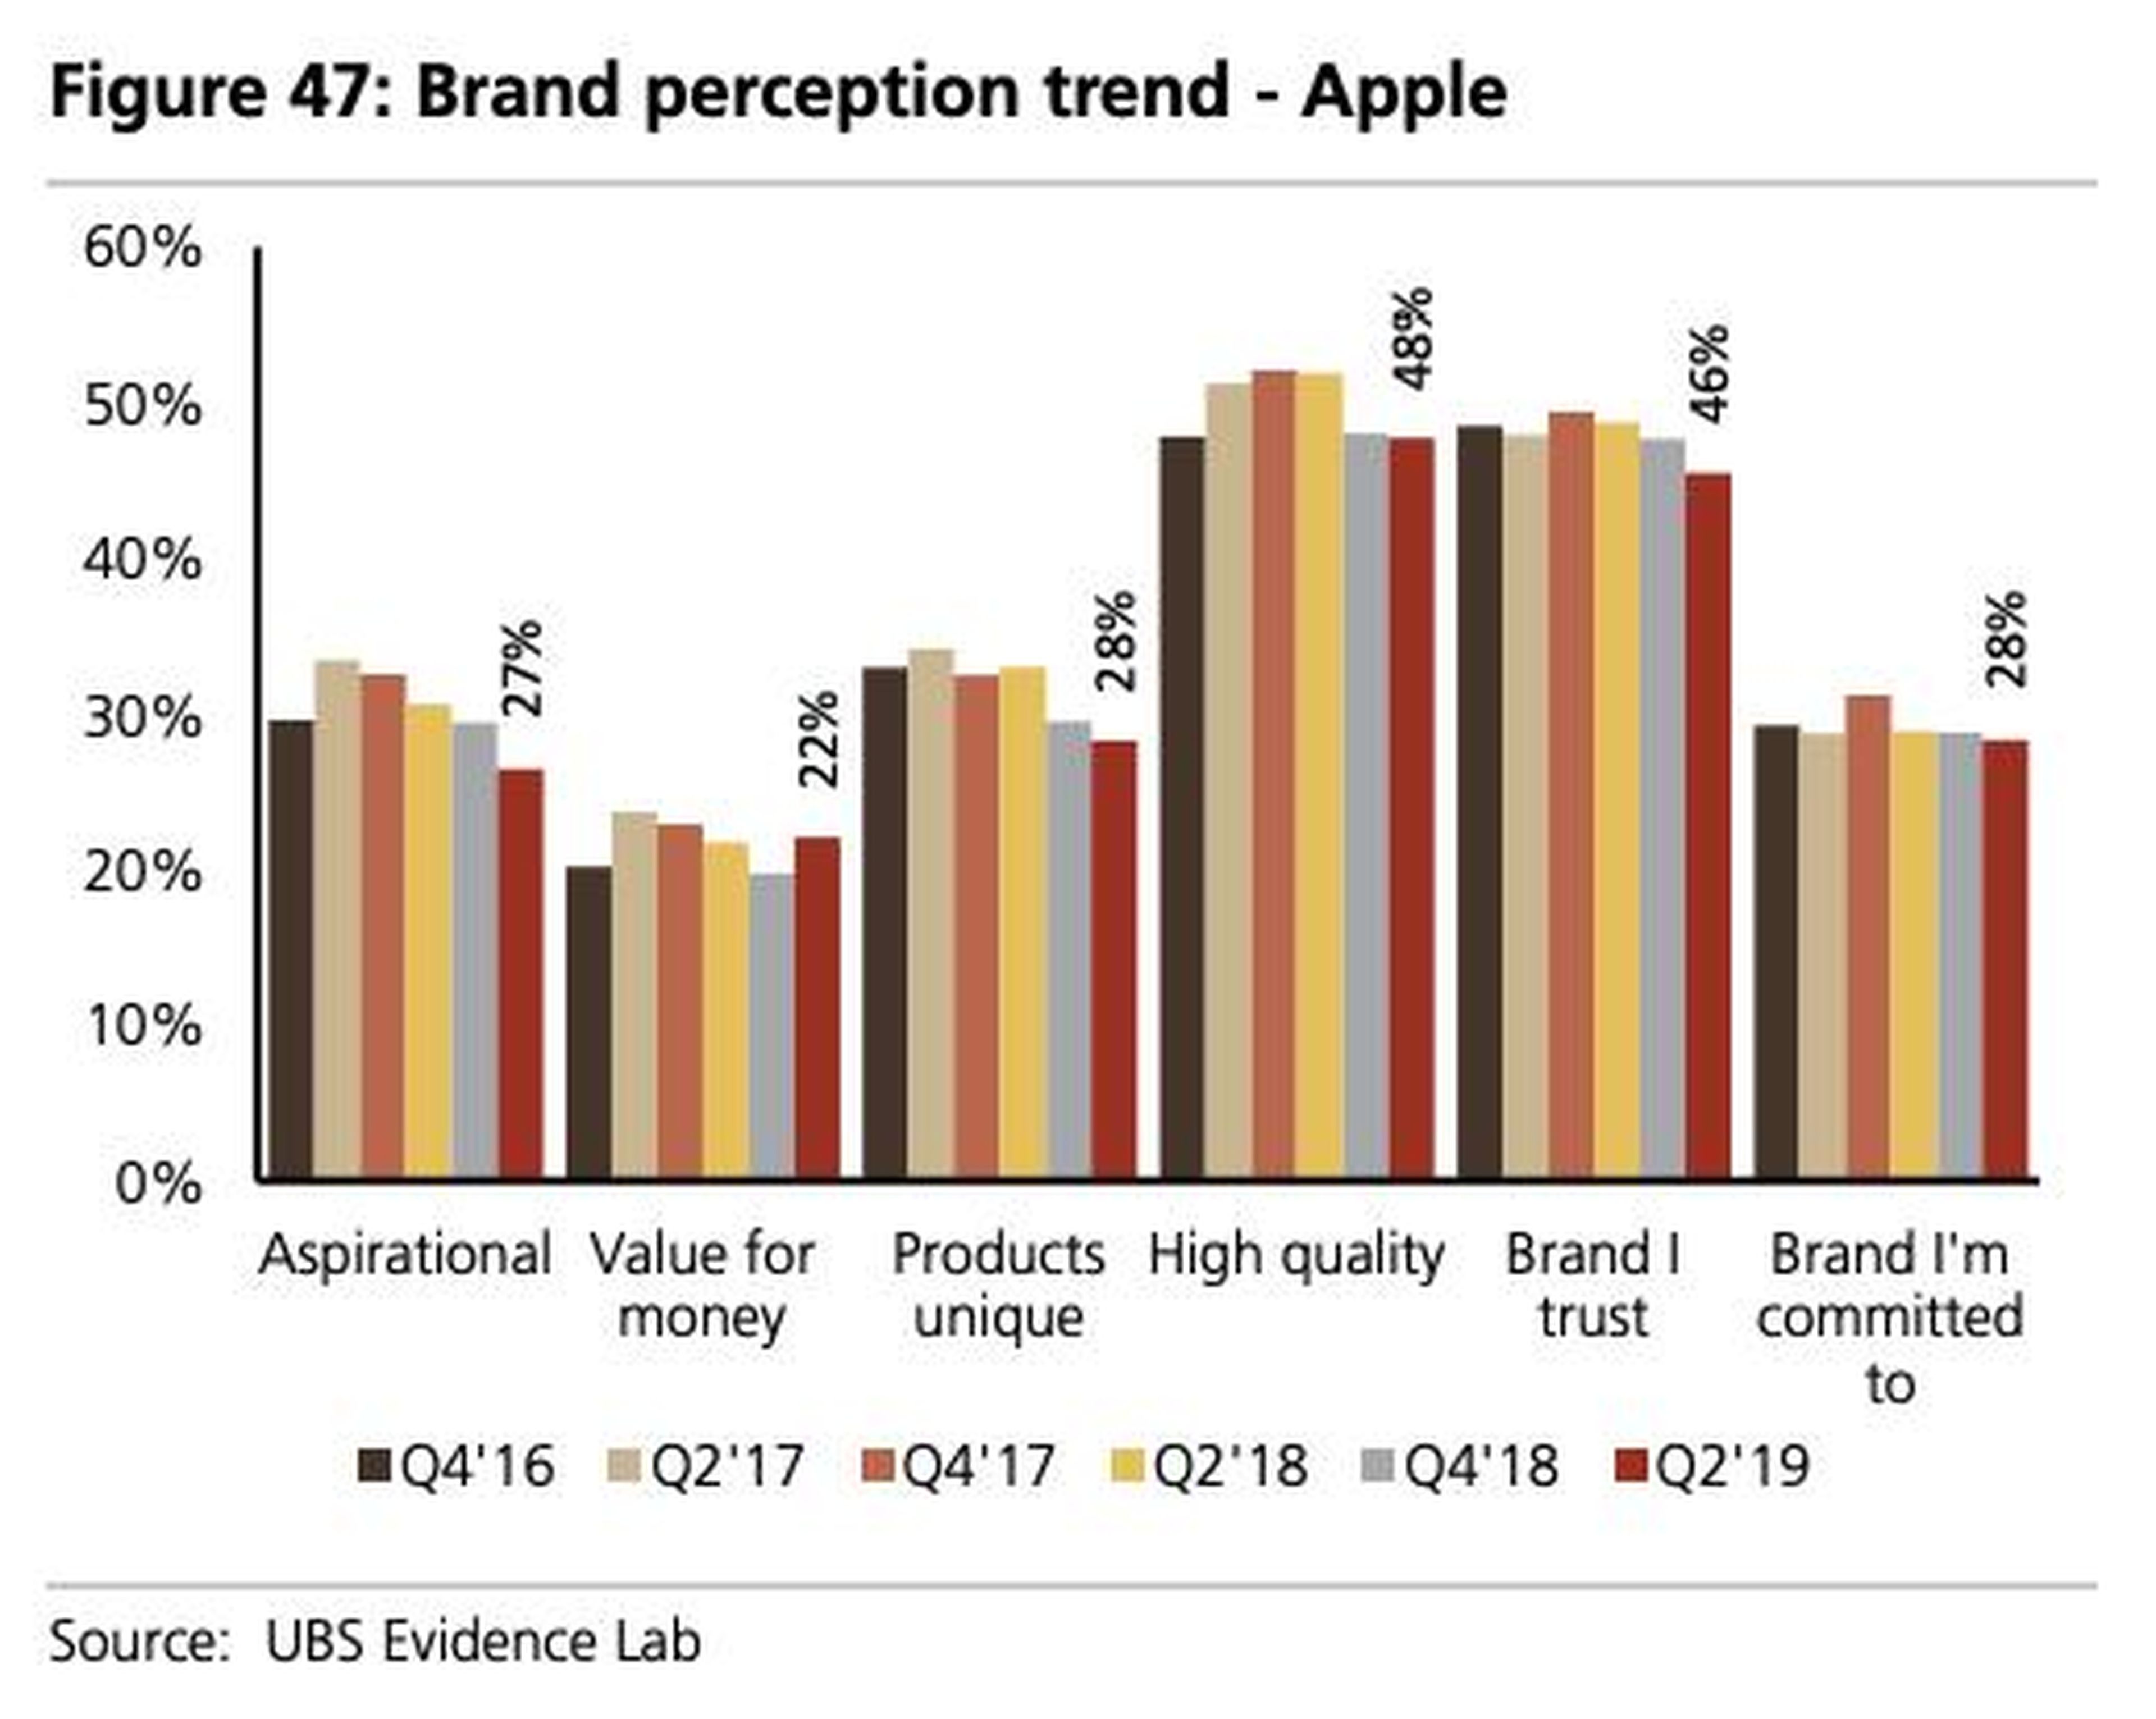 And Apple's been losing some of its allure as a "aspirational" brand with unique products.